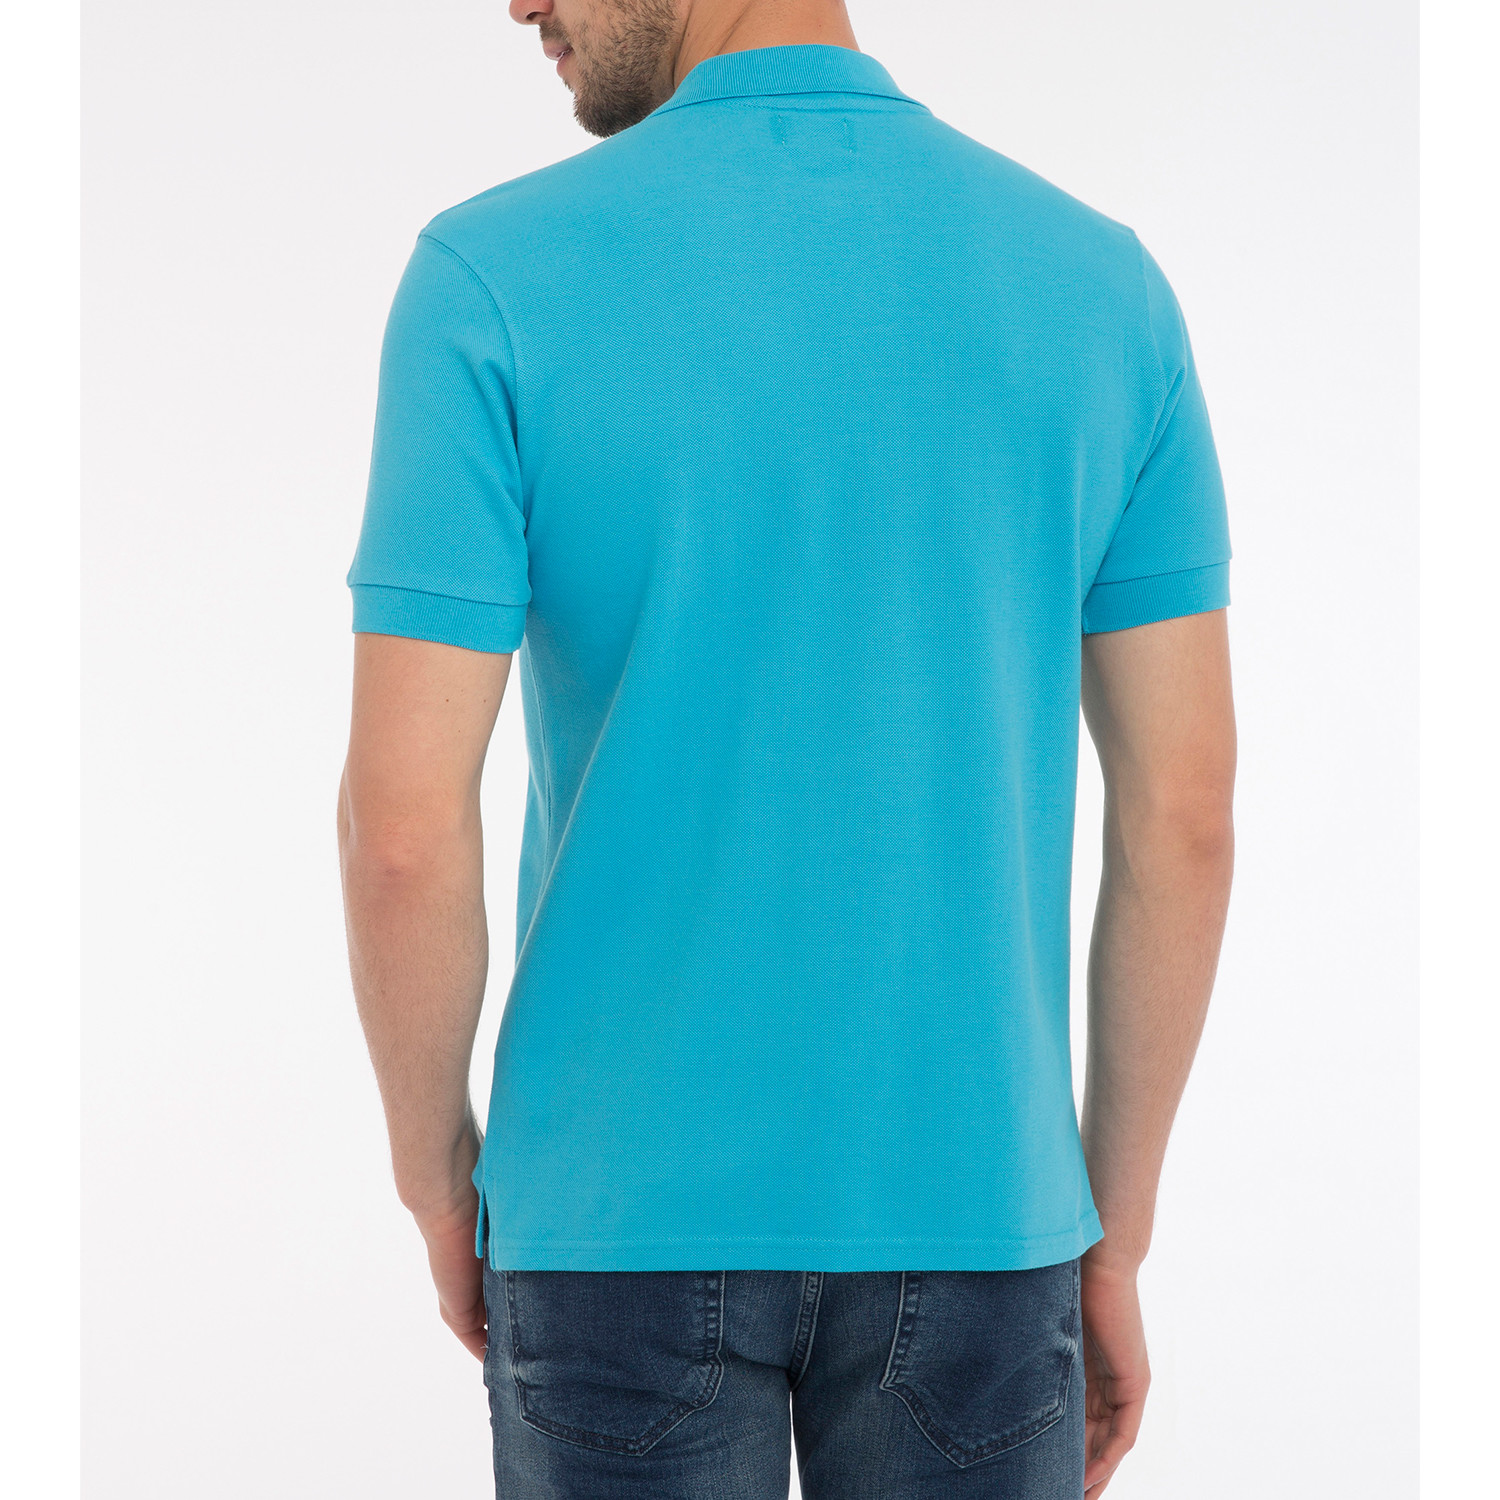 Sean Short Sleeve Polo Shirt // Turquoise (M) - Paul Parker - Touch of ...